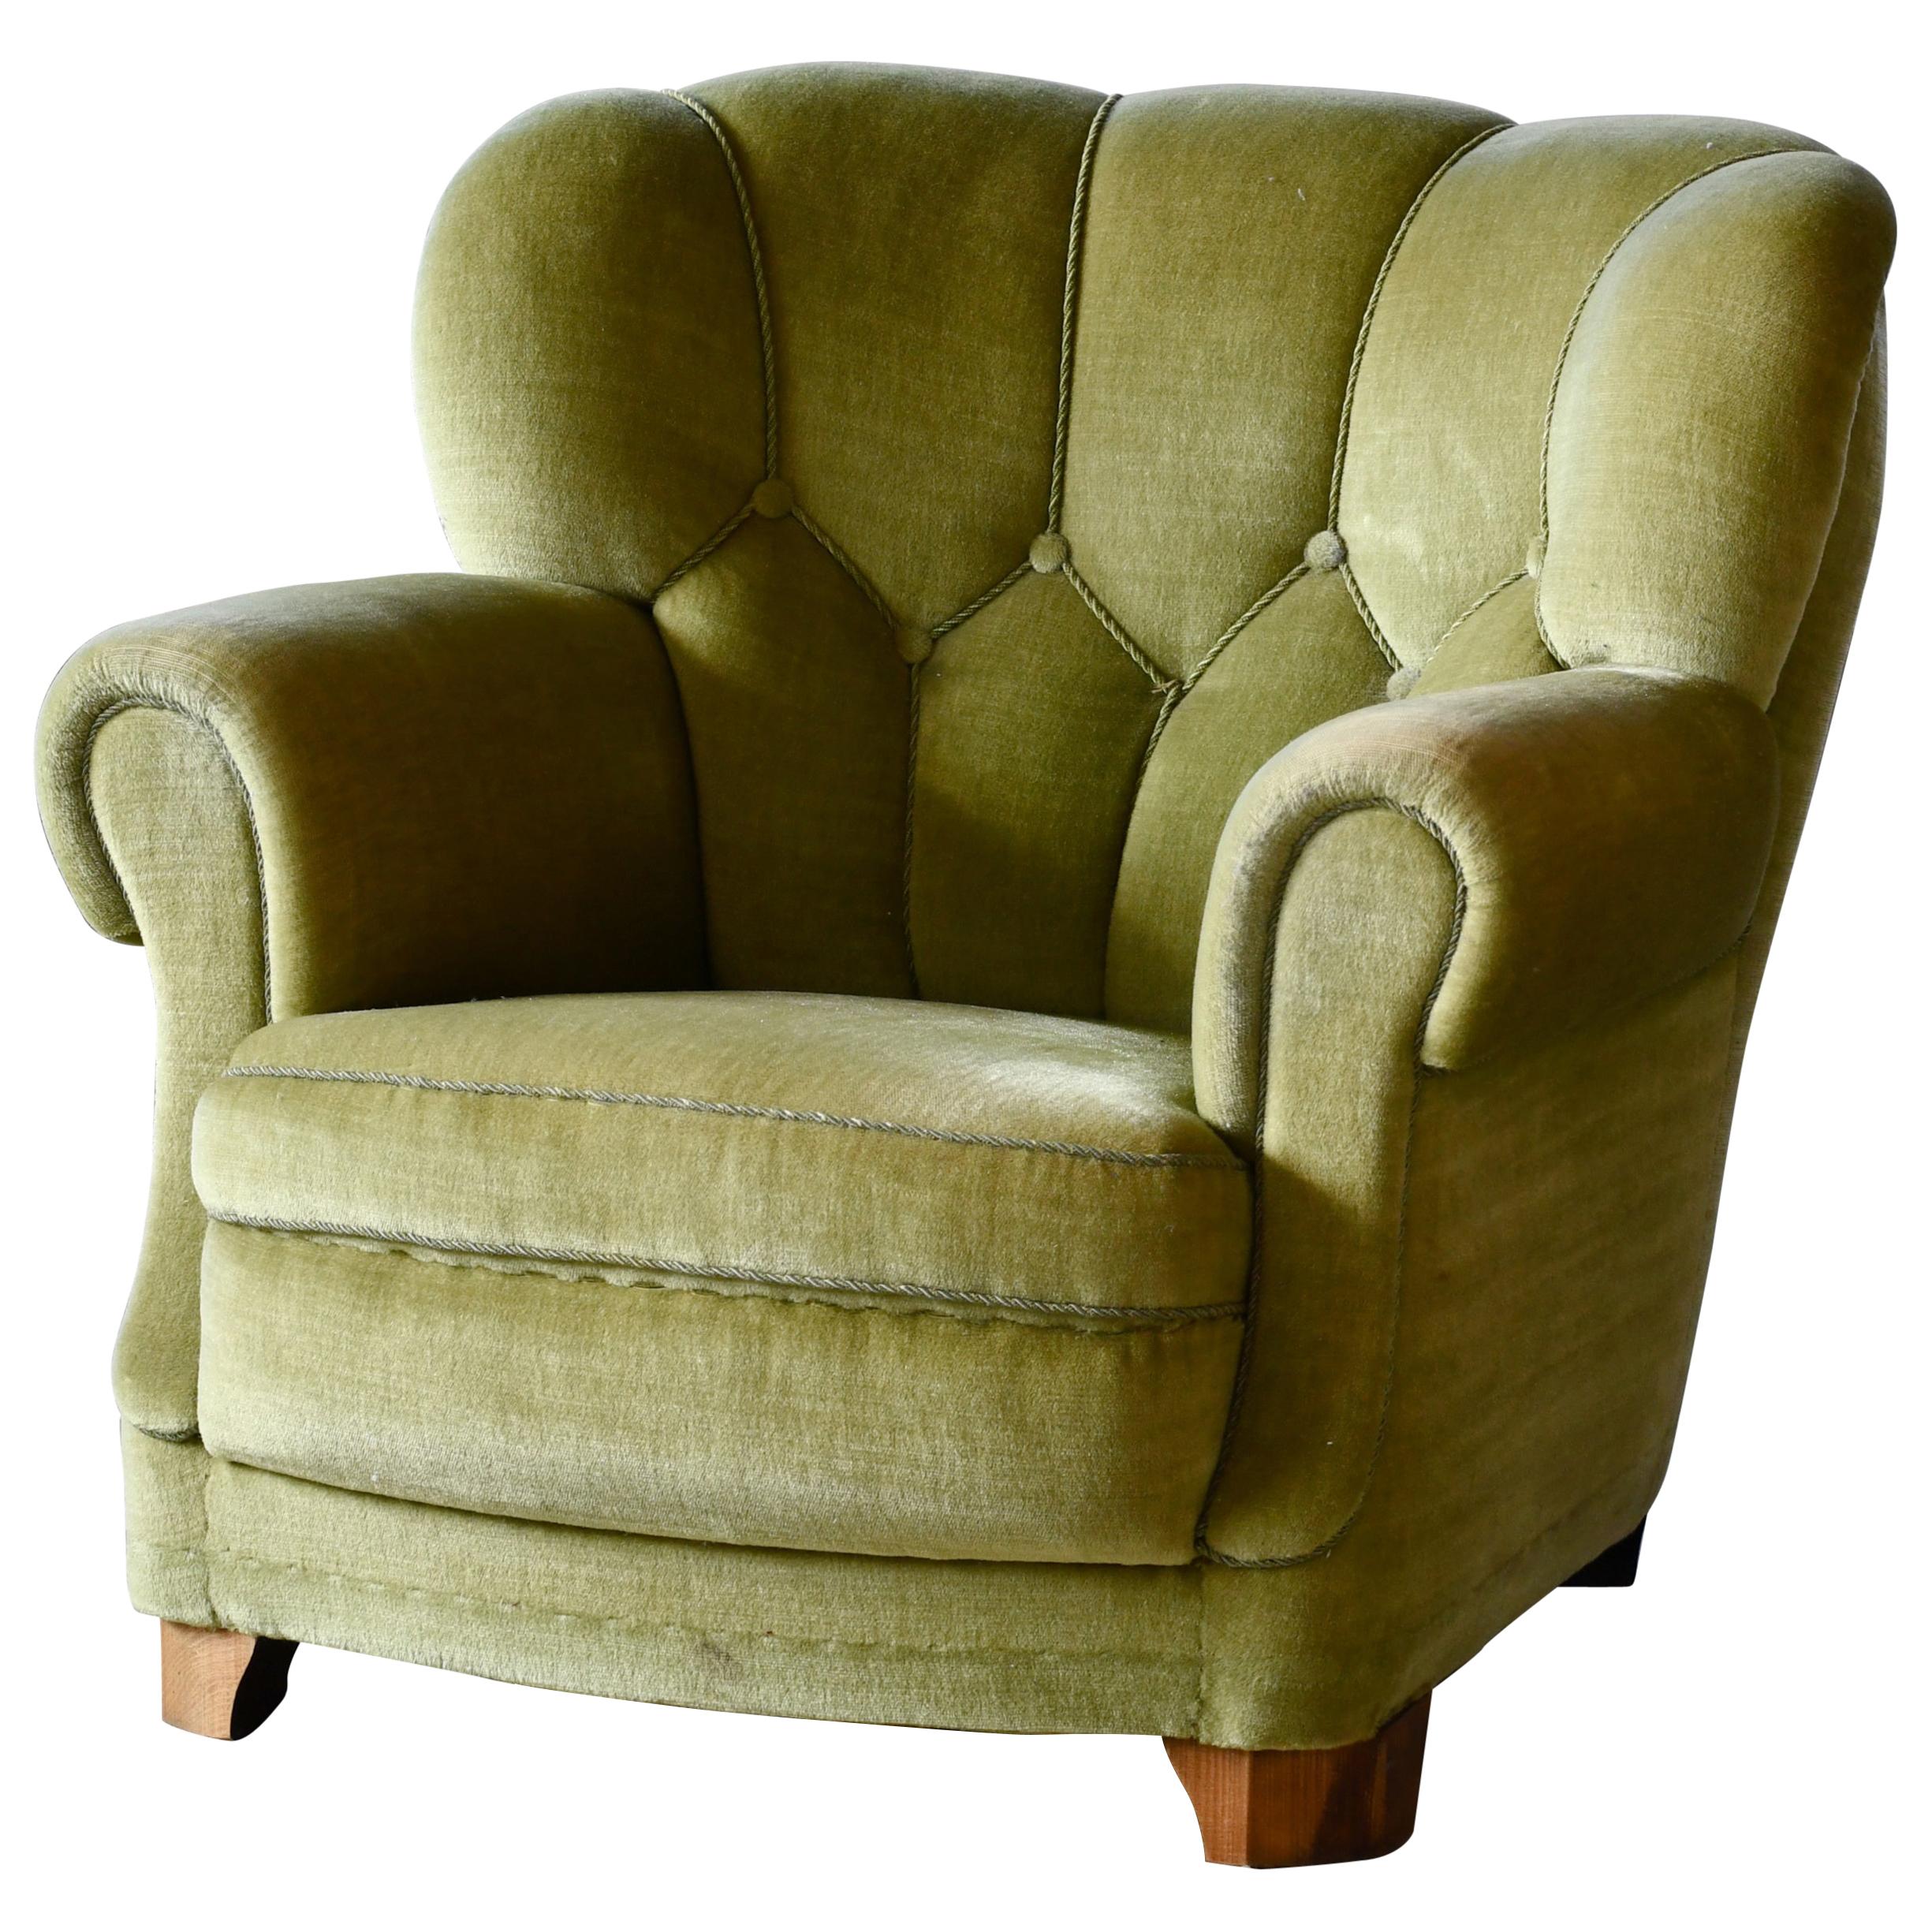 Danish Mid-Century Lounge or Club Chair in Green Mohair, 1940's